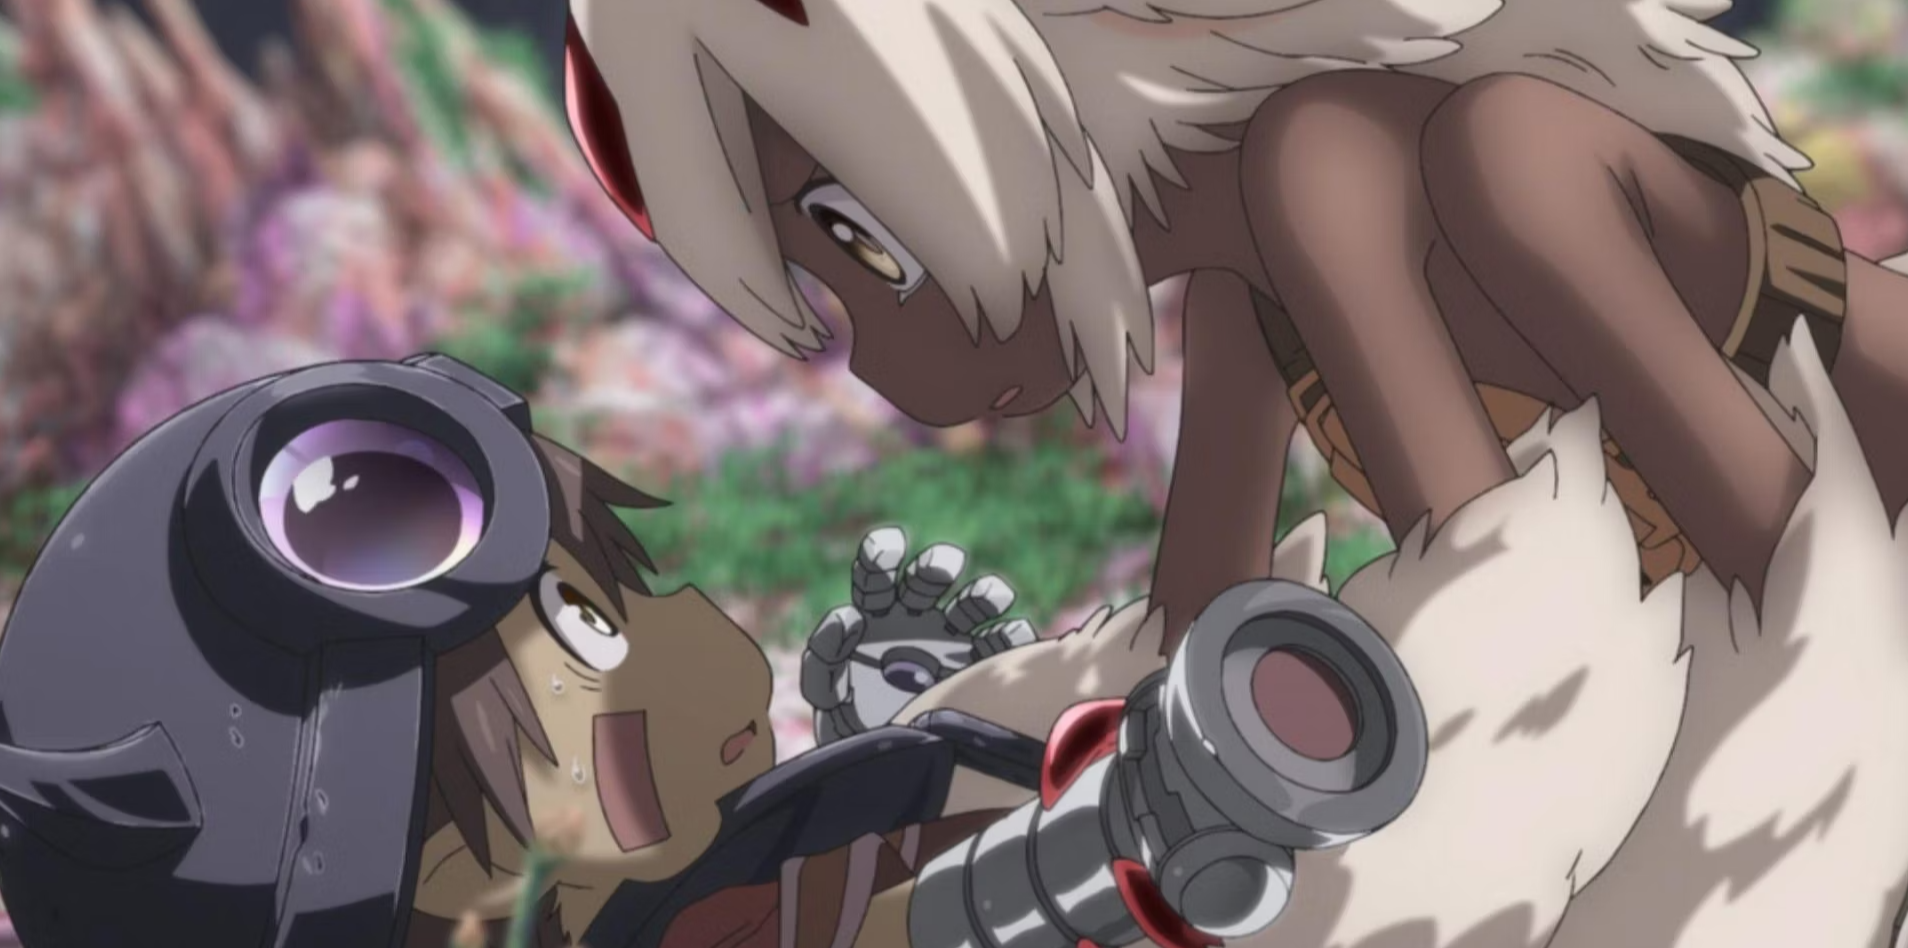 Made in Abyss Season 2 Episode 09